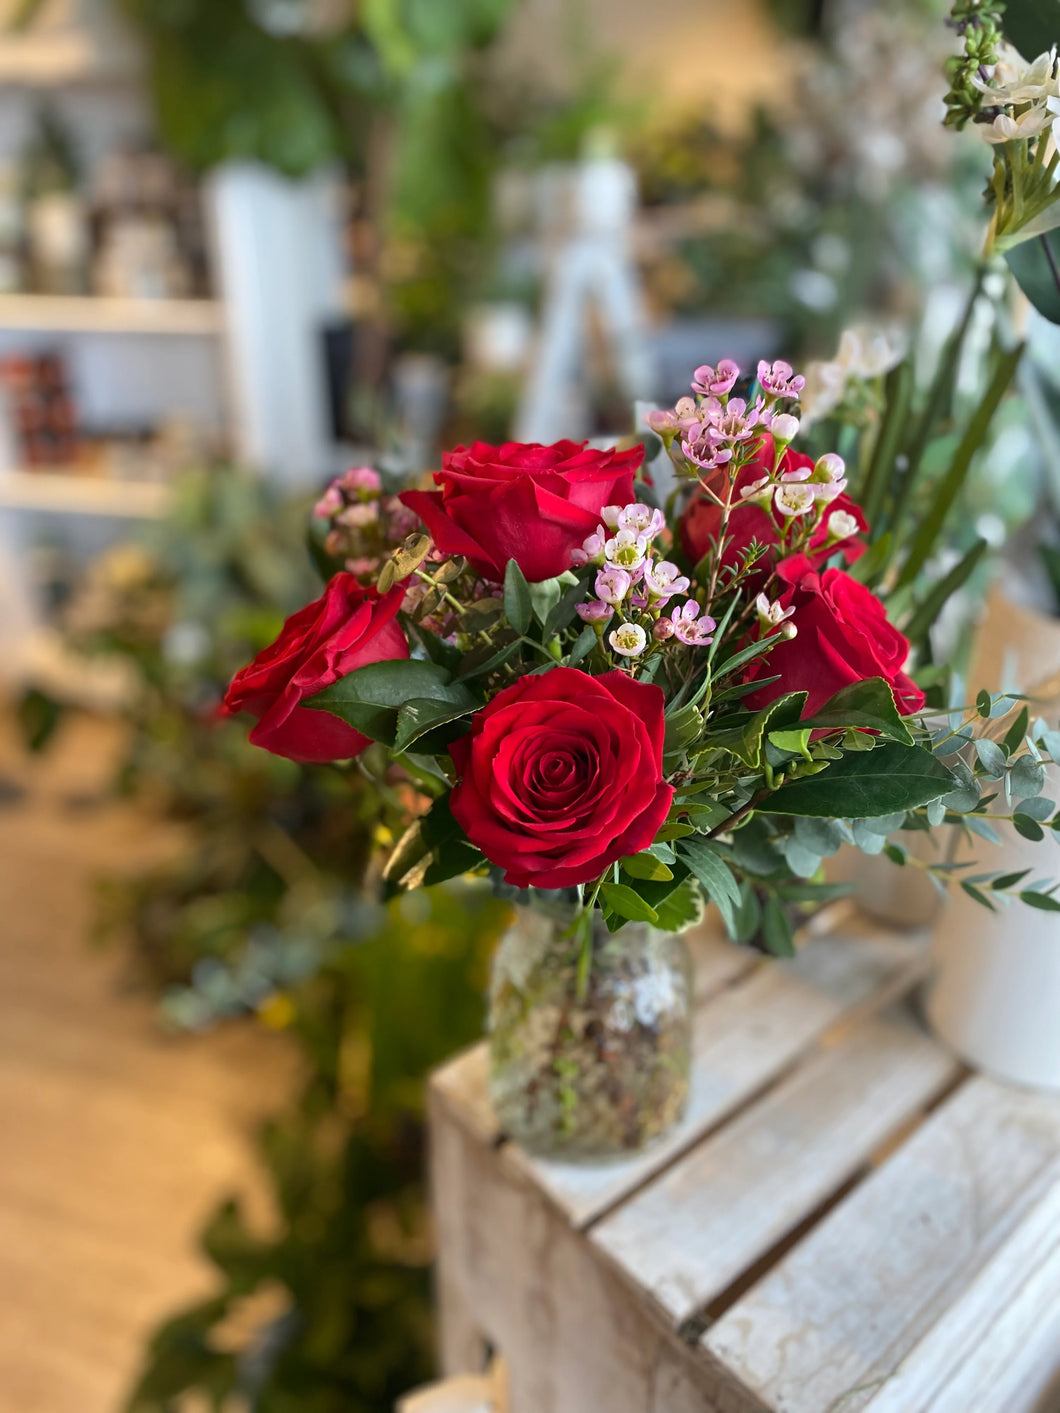 Red Roses in a Vase